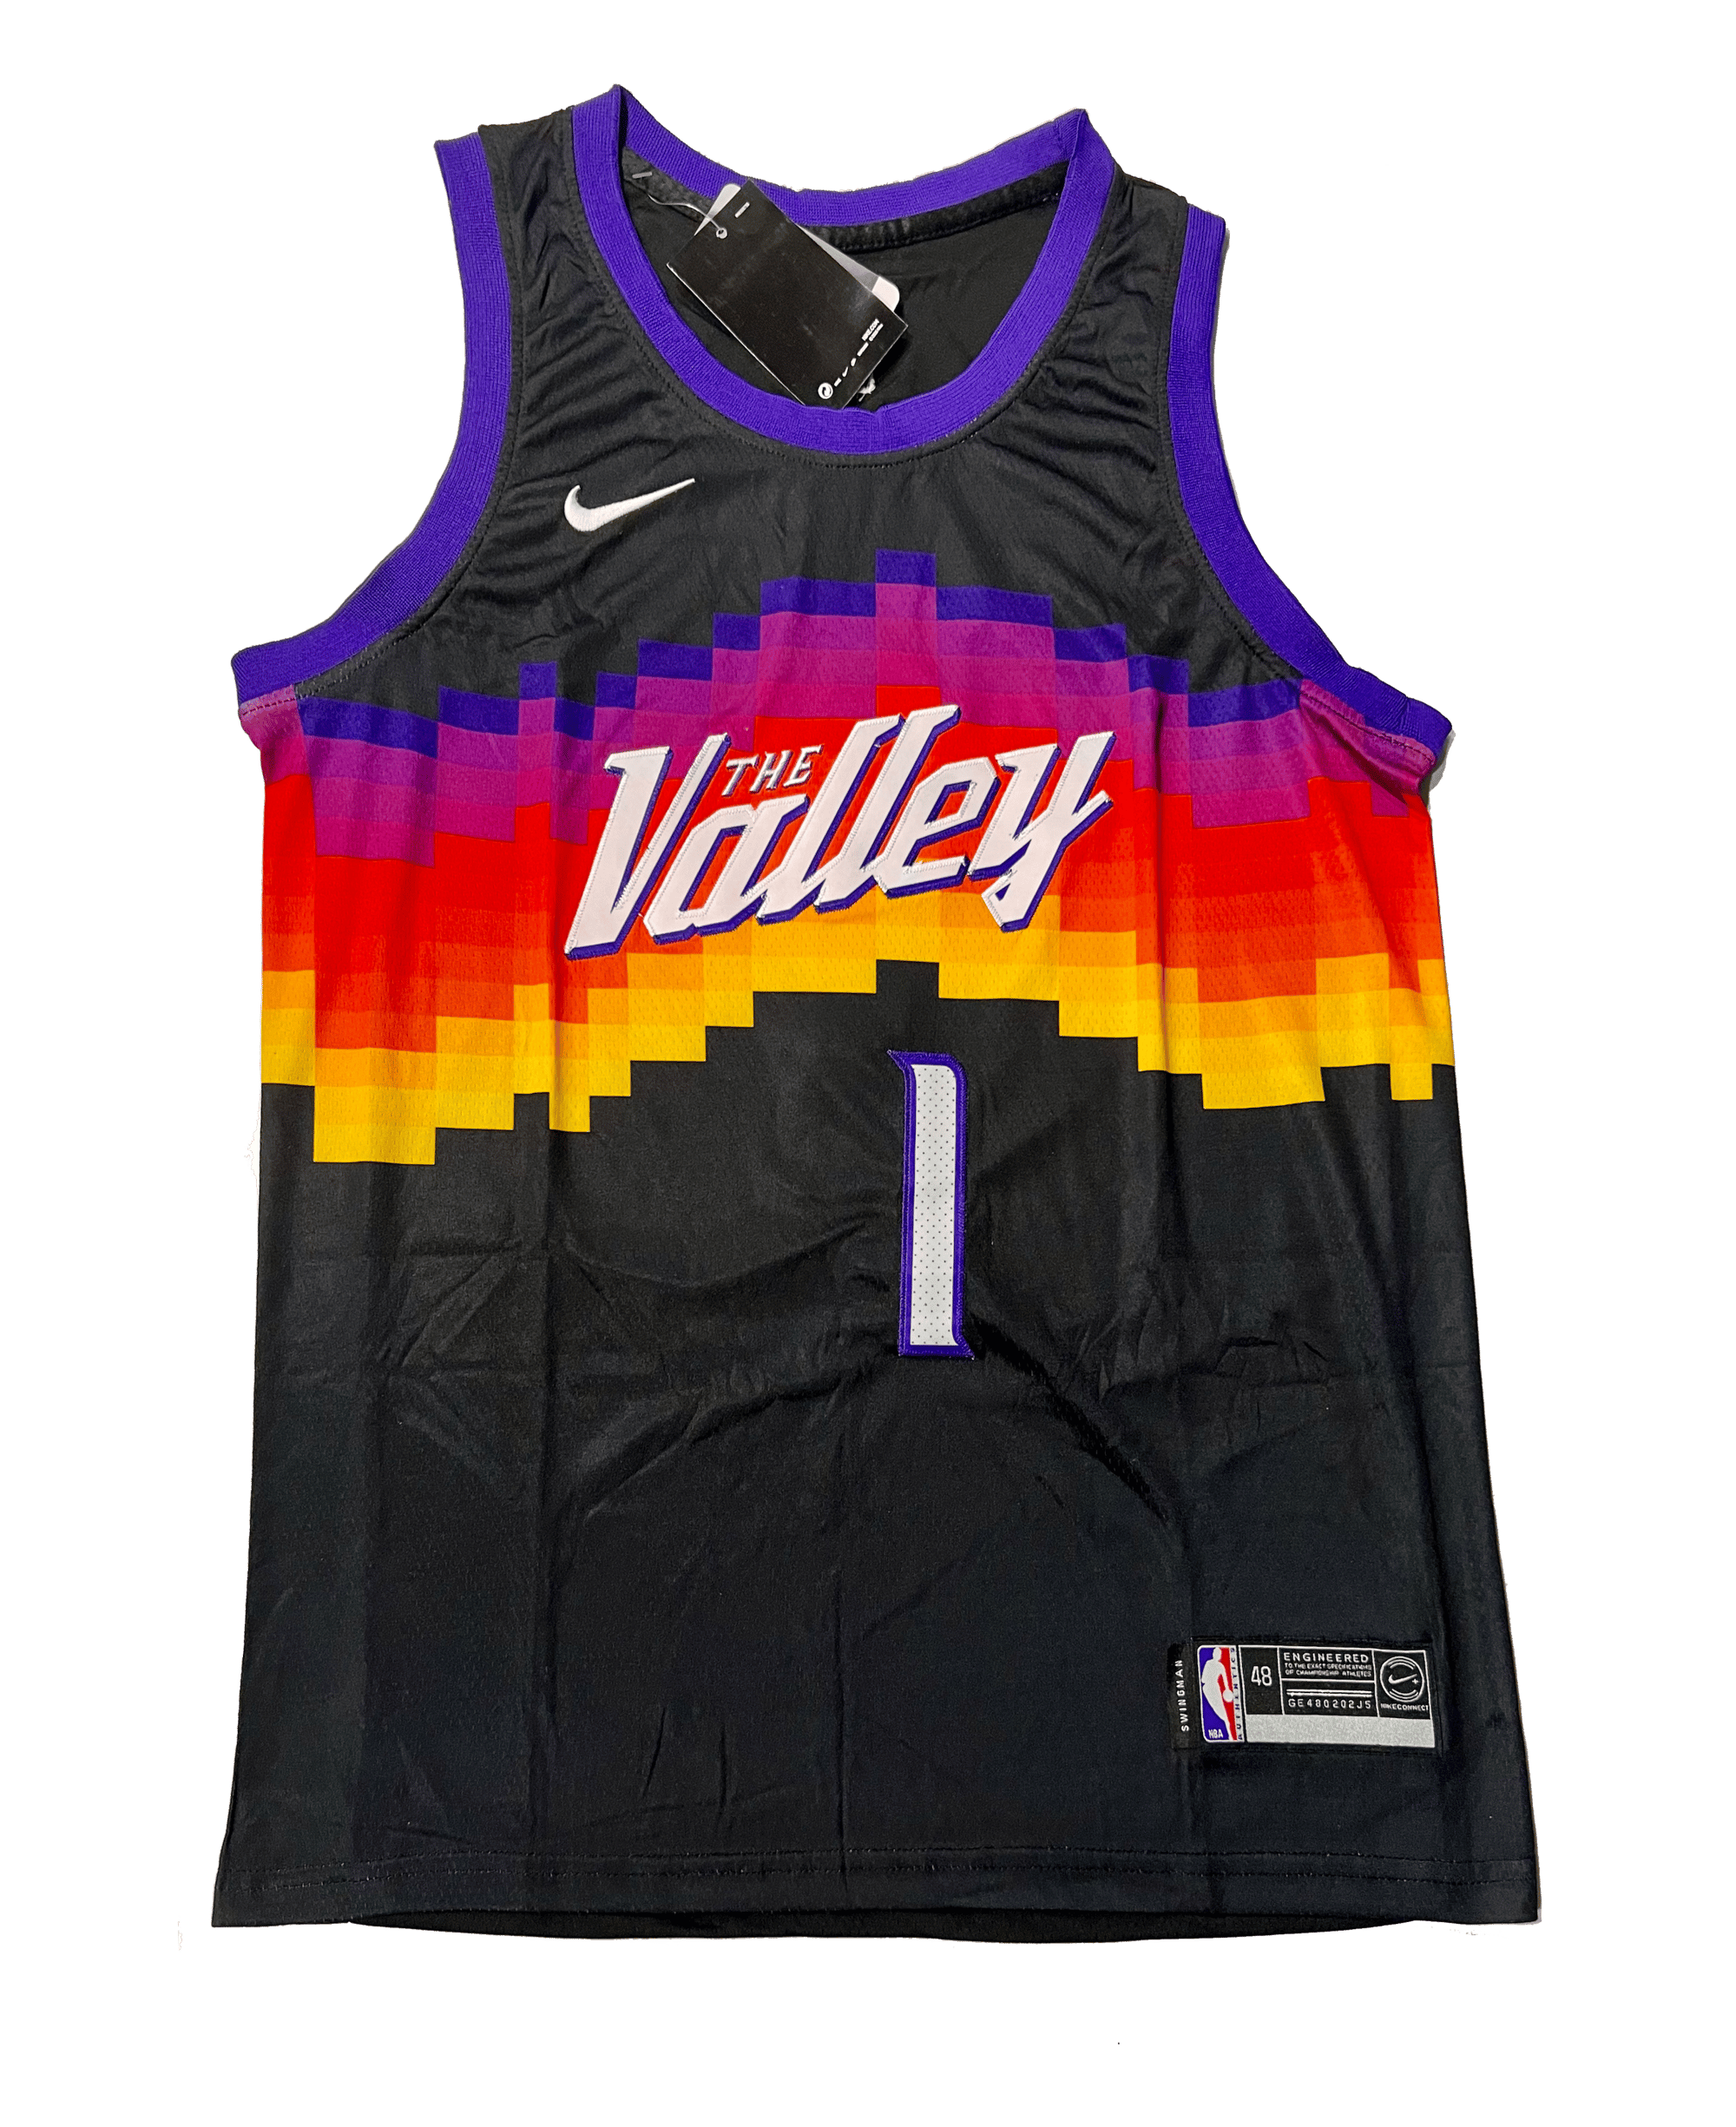 Devin Booker Phoenix Suns City Edition The Valley Jersey